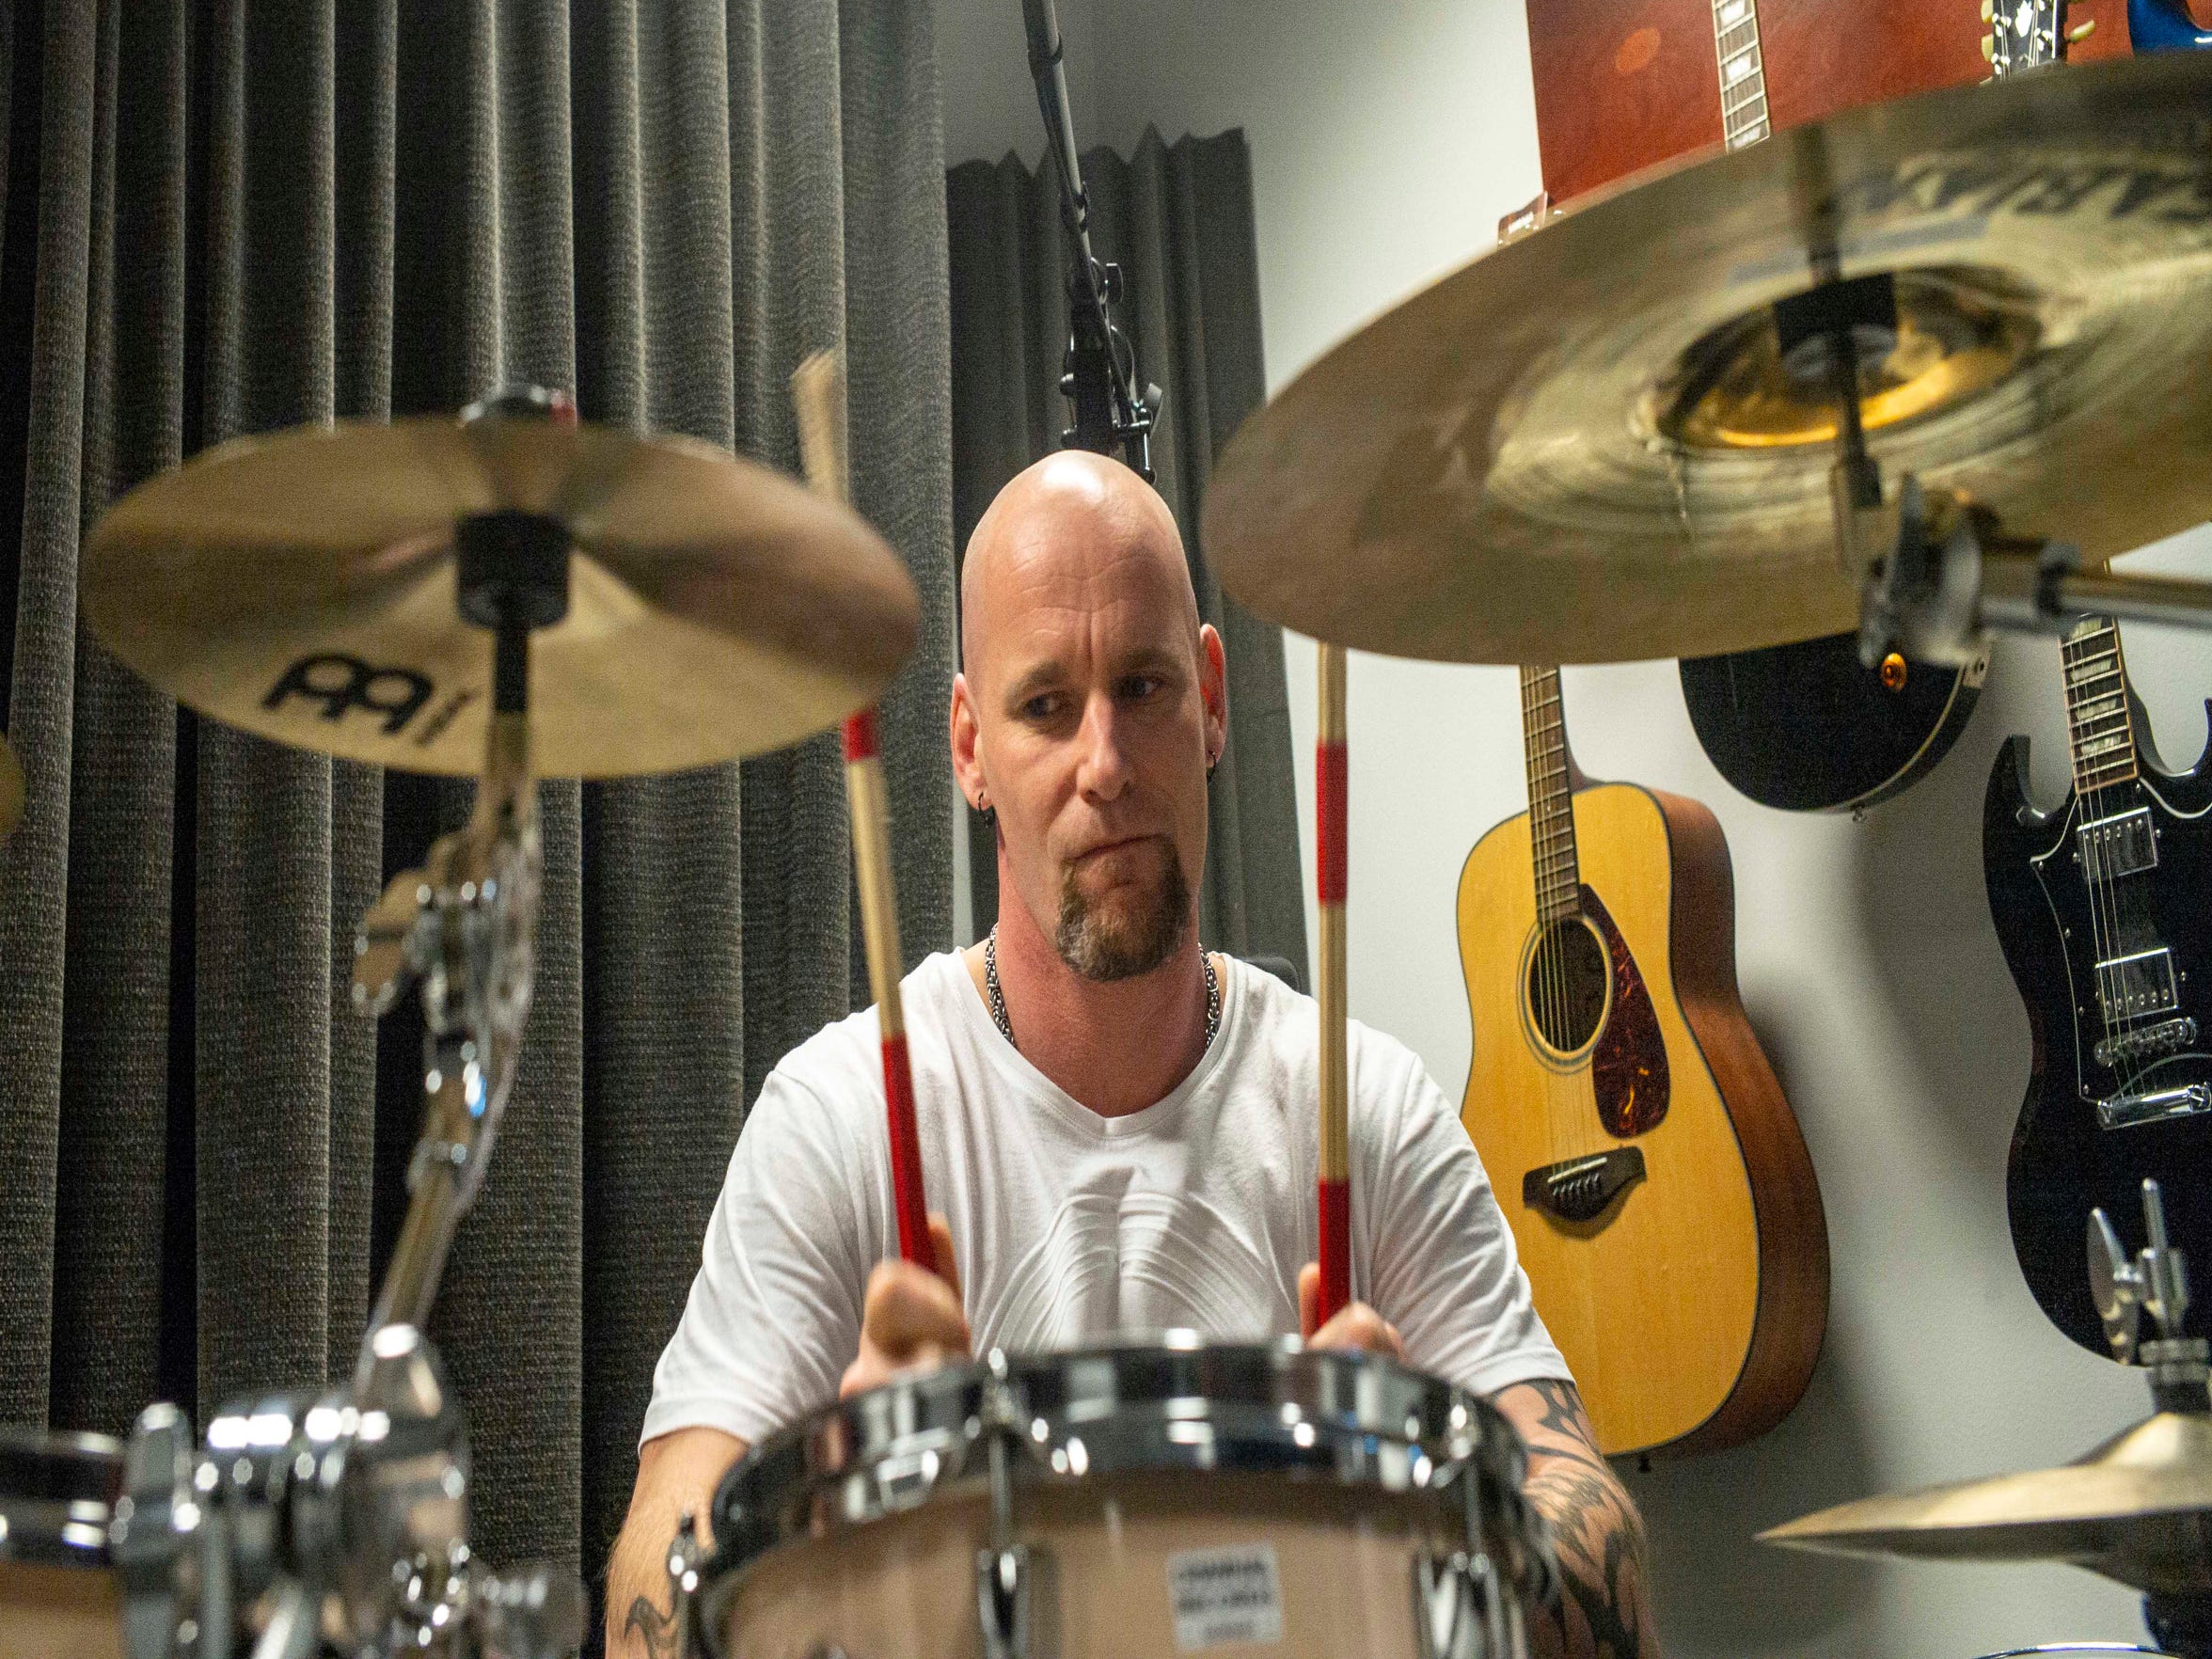 Inmate Mike, who didn't give his last name, plays the drums at Halden Prison in Norway. He's from the Netherlands, and among 40 percent of Halden prisoners who come from foreign countries.